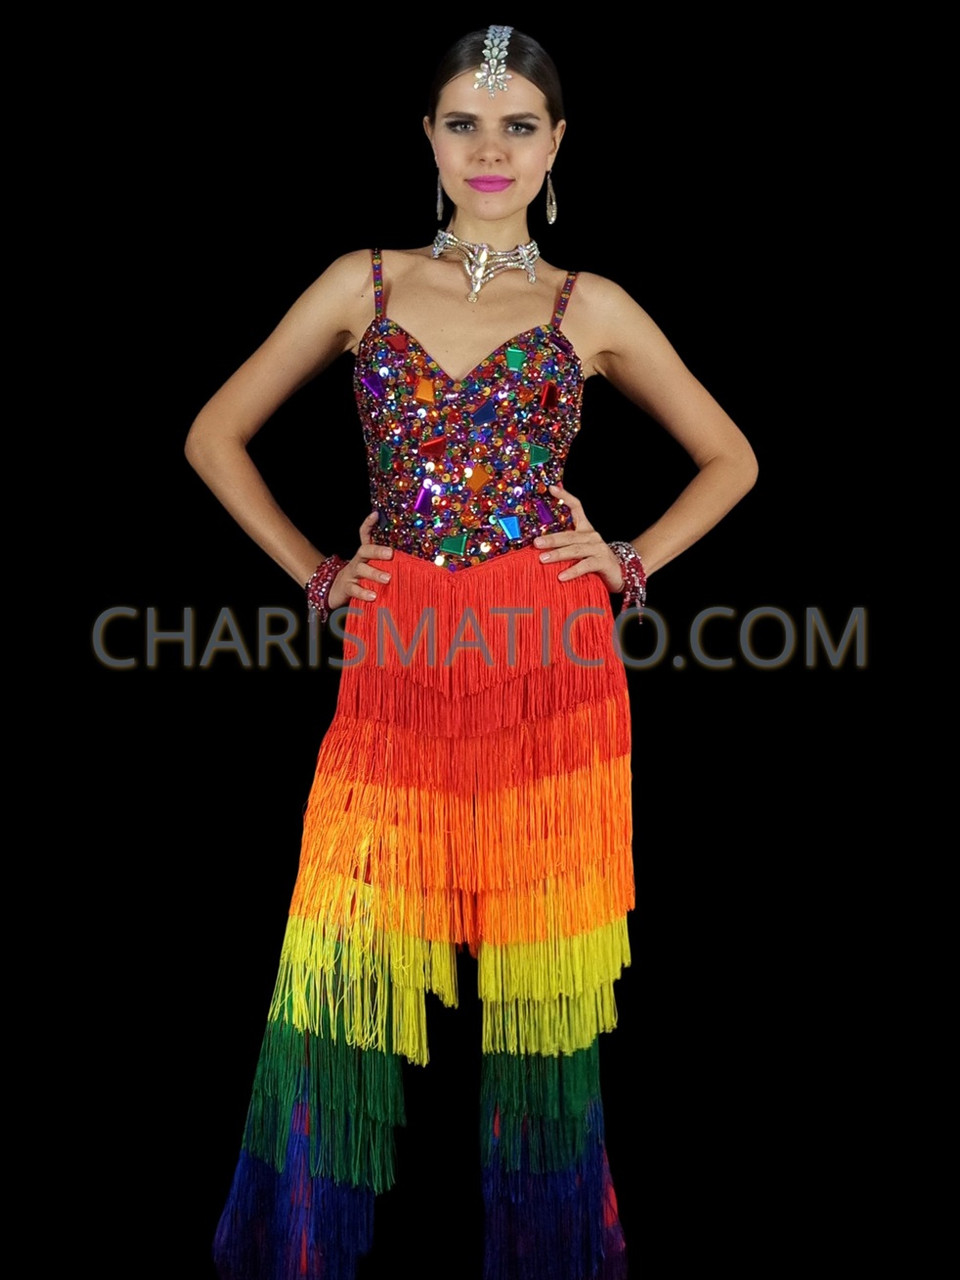 PRIDE! Multicolor Jewel Bedazzled Bra With Feather Fringe Trim and